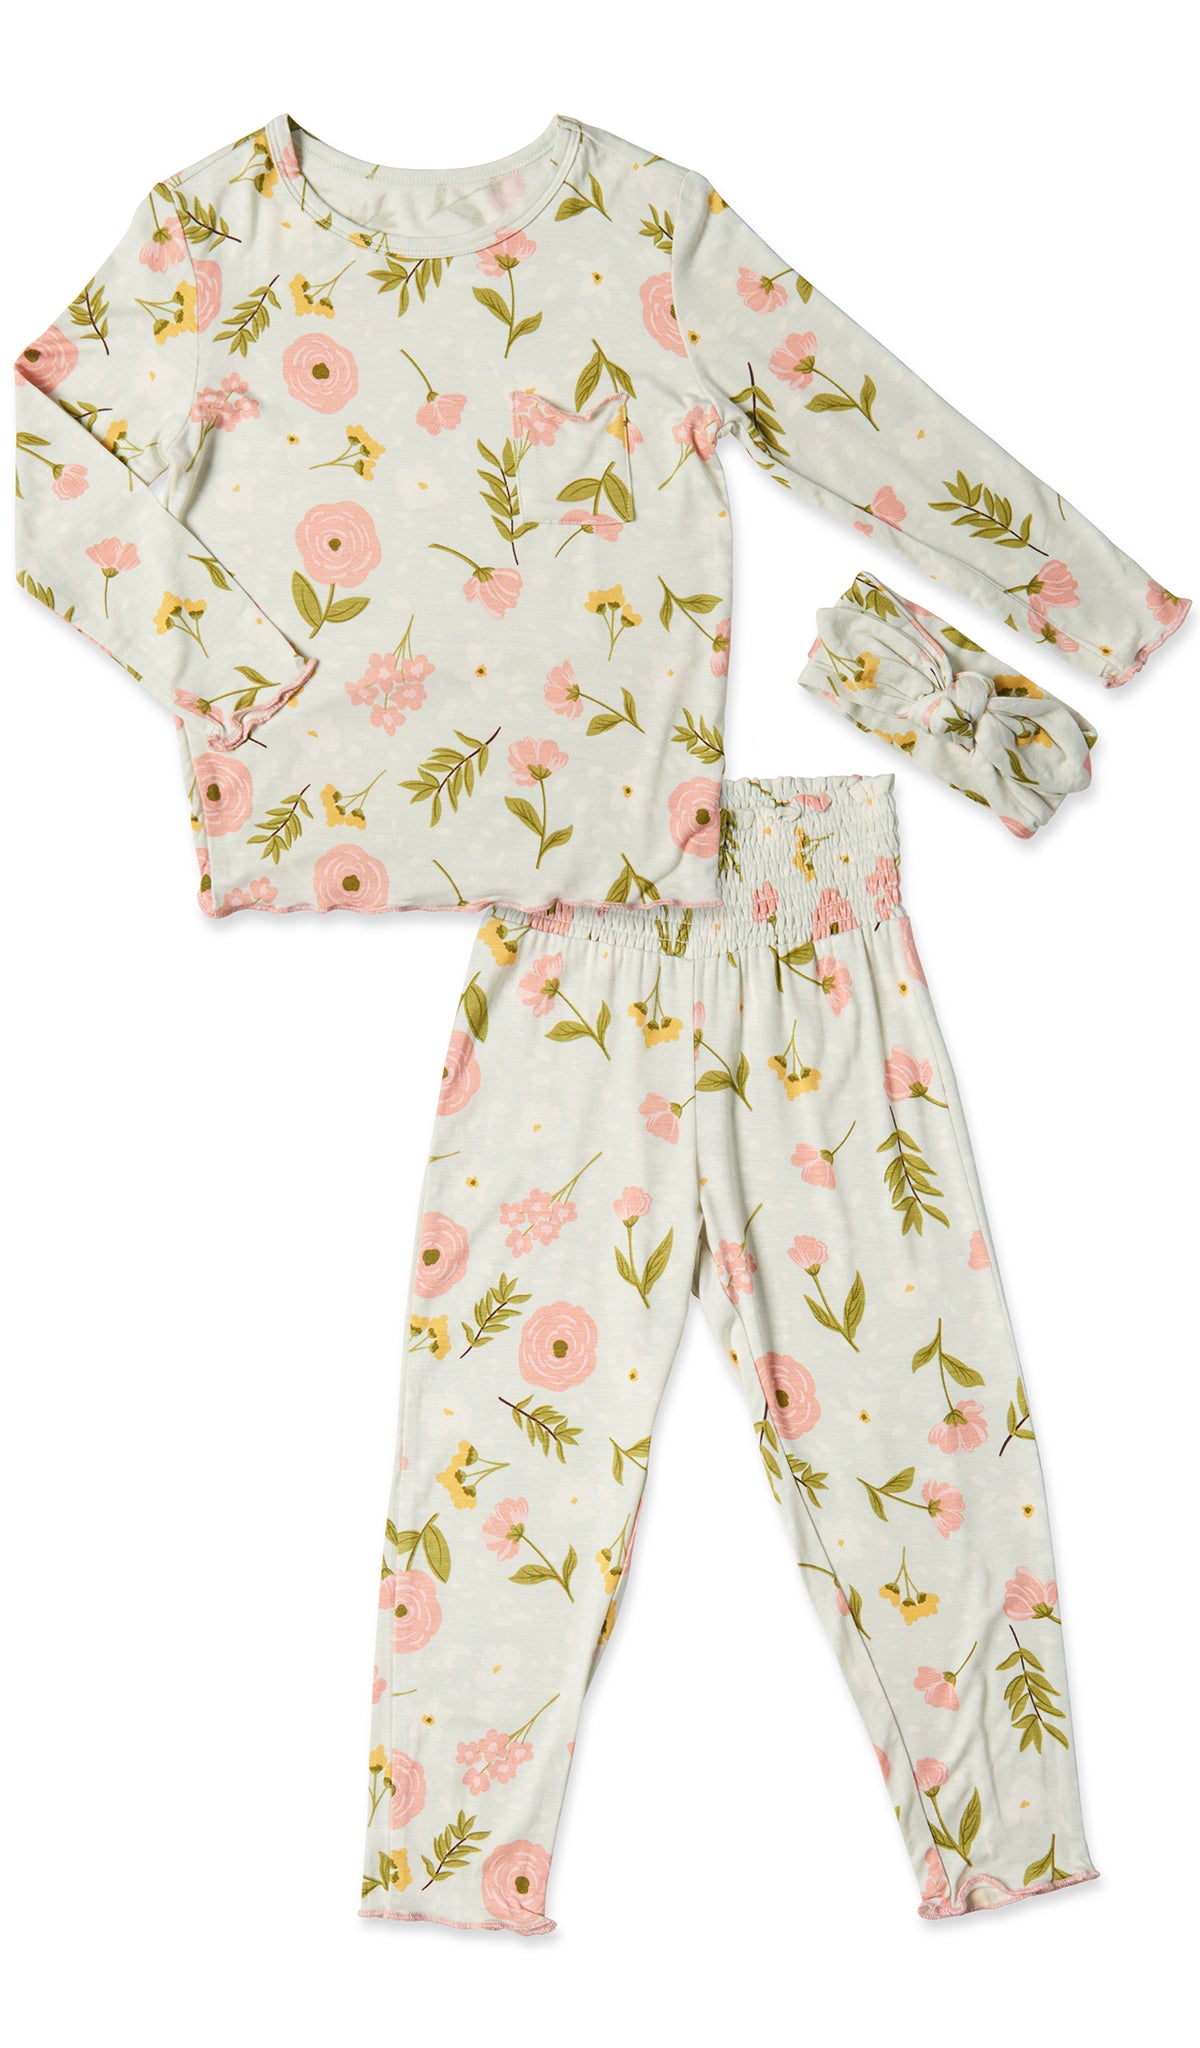 Carnation Charlie Baby 3-Piece Pant PJ. Long sleeve top with smocked waistband pant and matching headwrap. Lettuce trim detail on sleeve edge, top and pant hem.